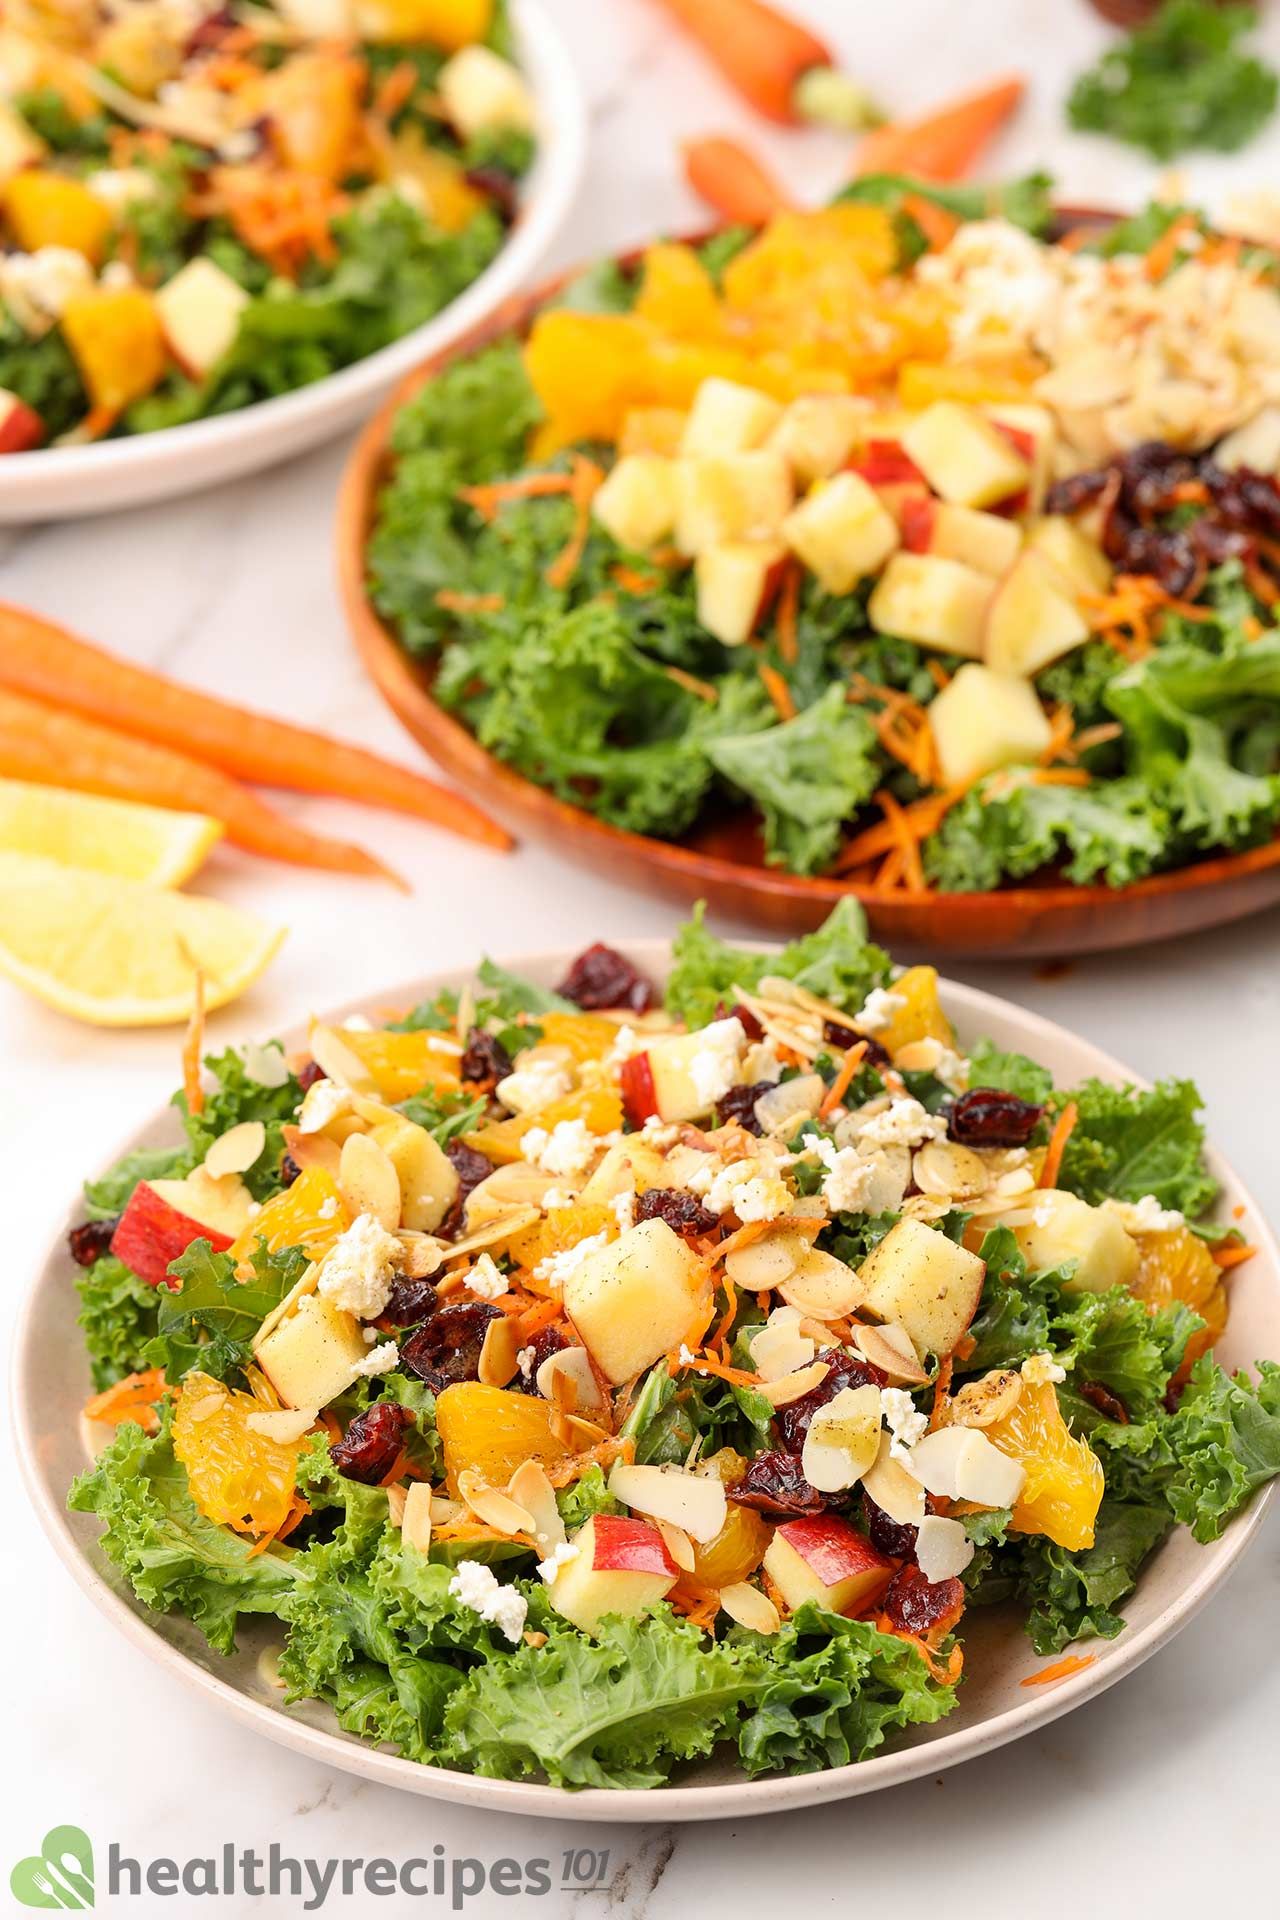 what to eat with this kale salad